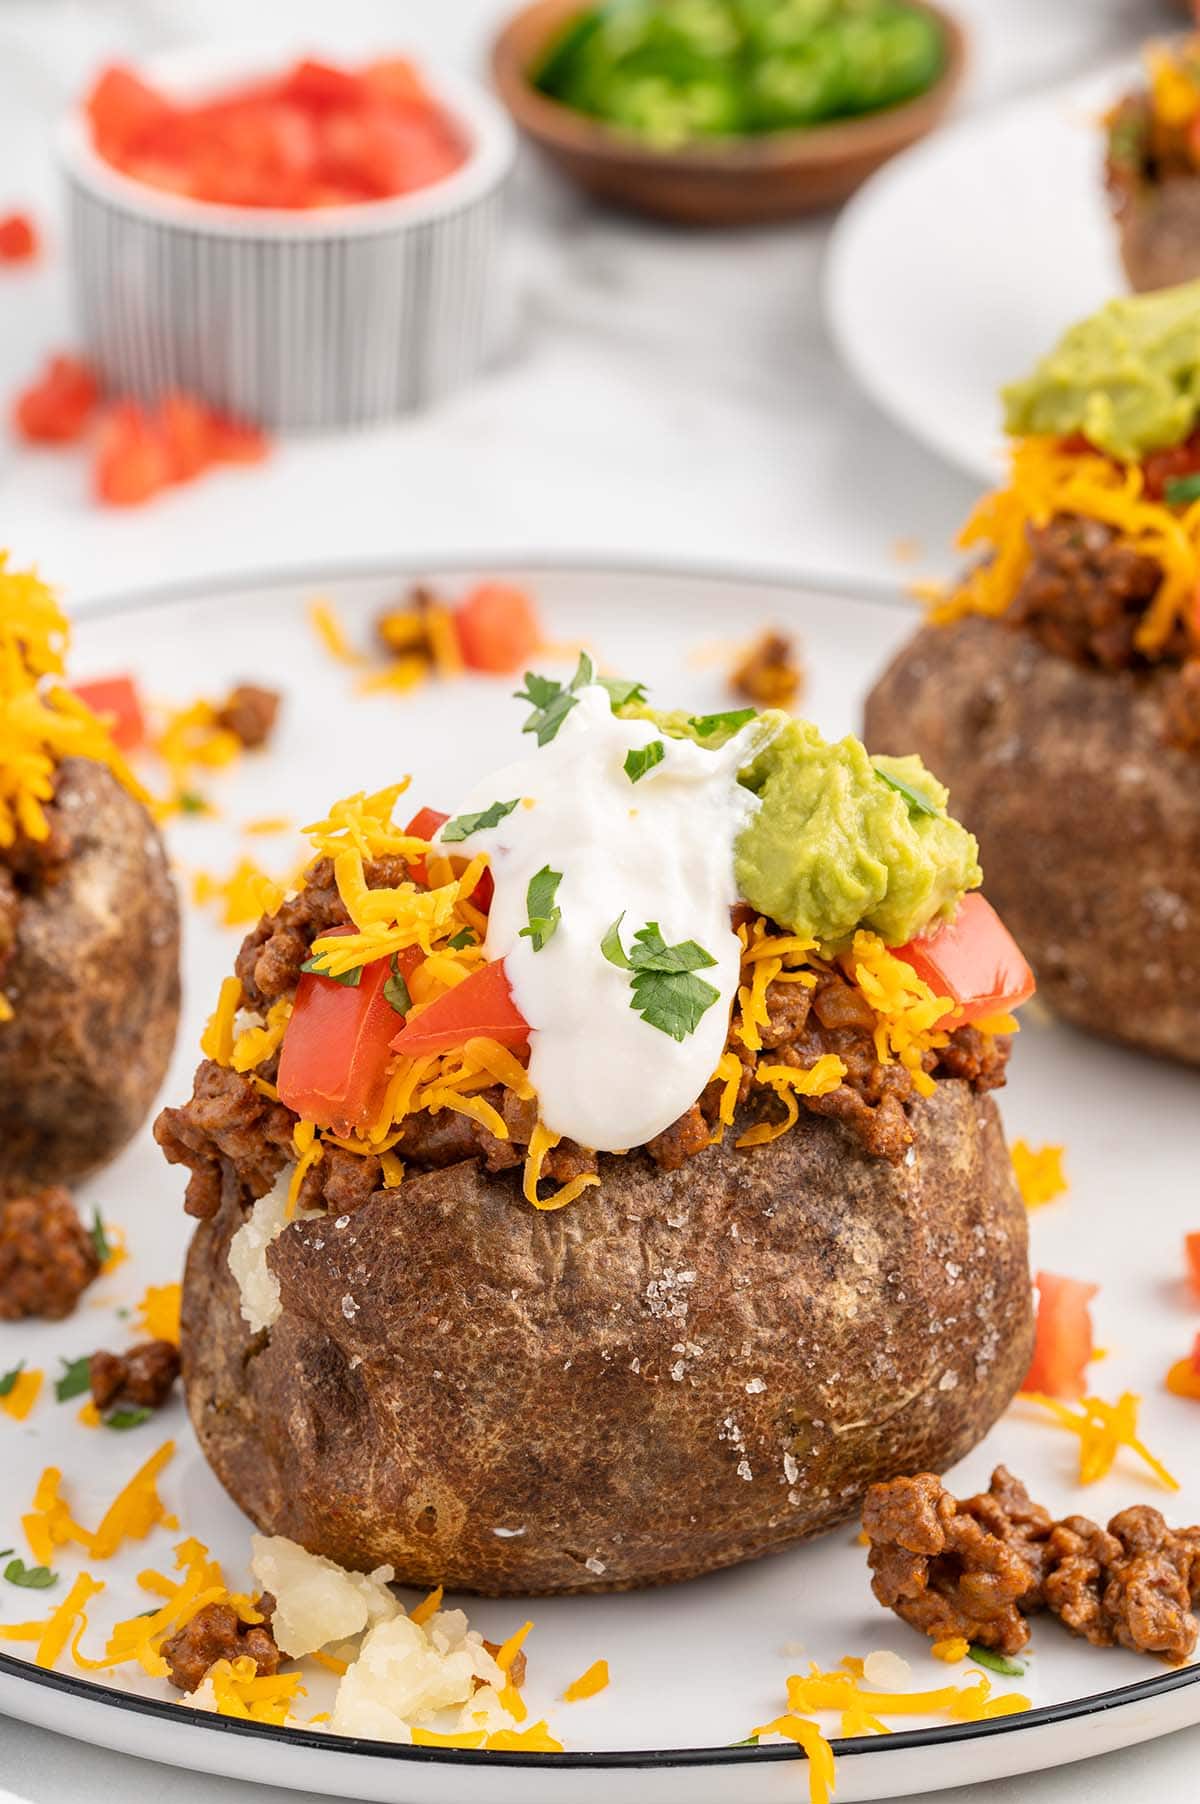 Taco Potatoes with ground beef, cheese, sour cream and guacamole.